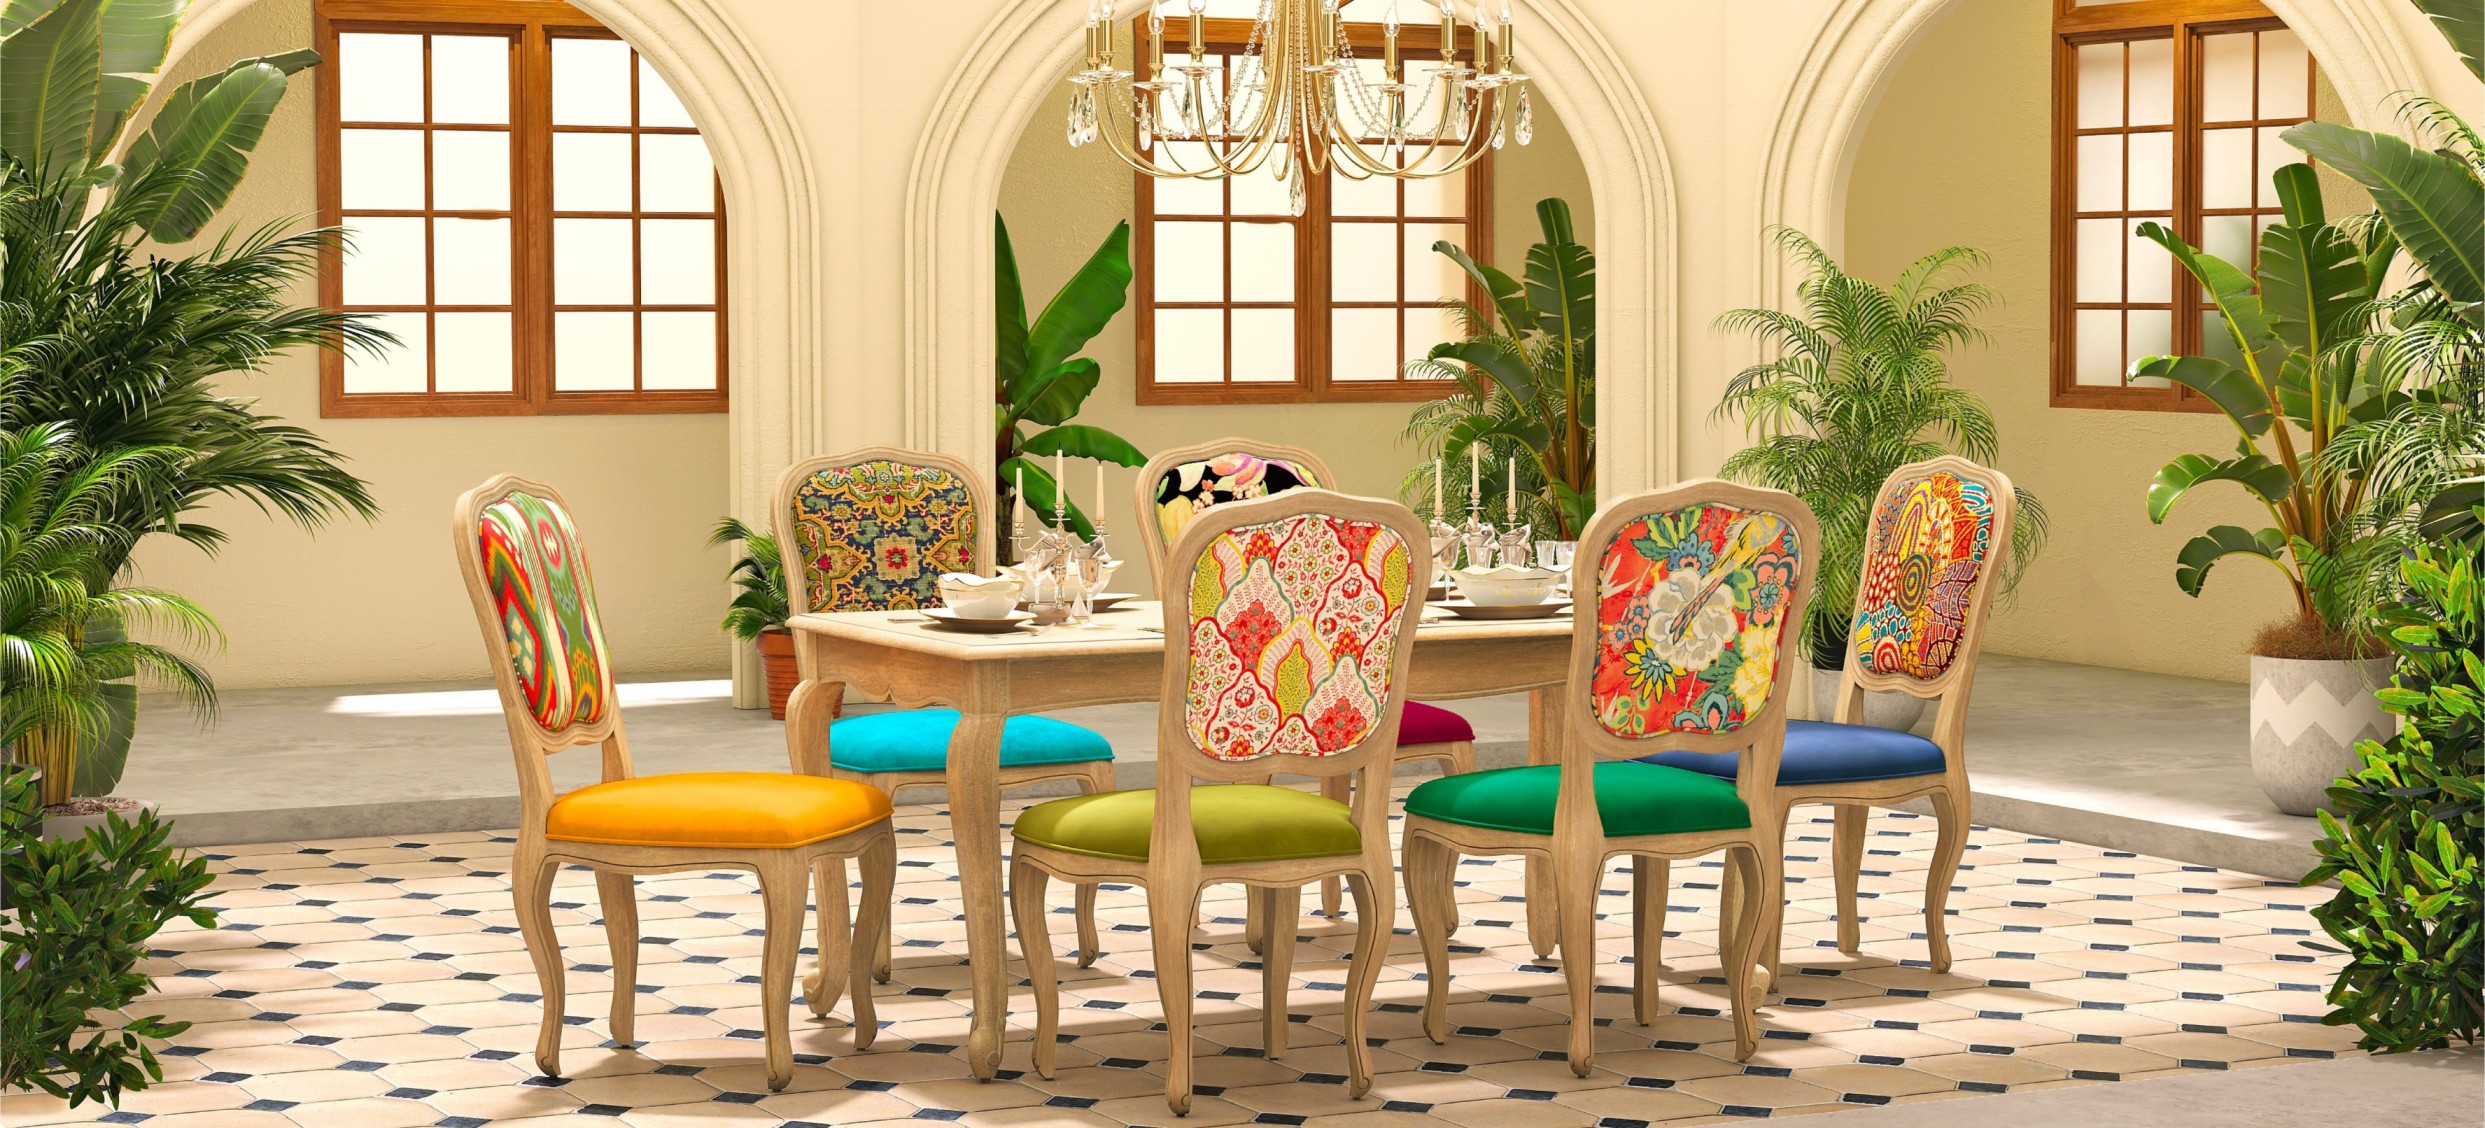 Add a Splash of Vibrance to Your Dining Space with the Limited Edition Mehr Dining Set